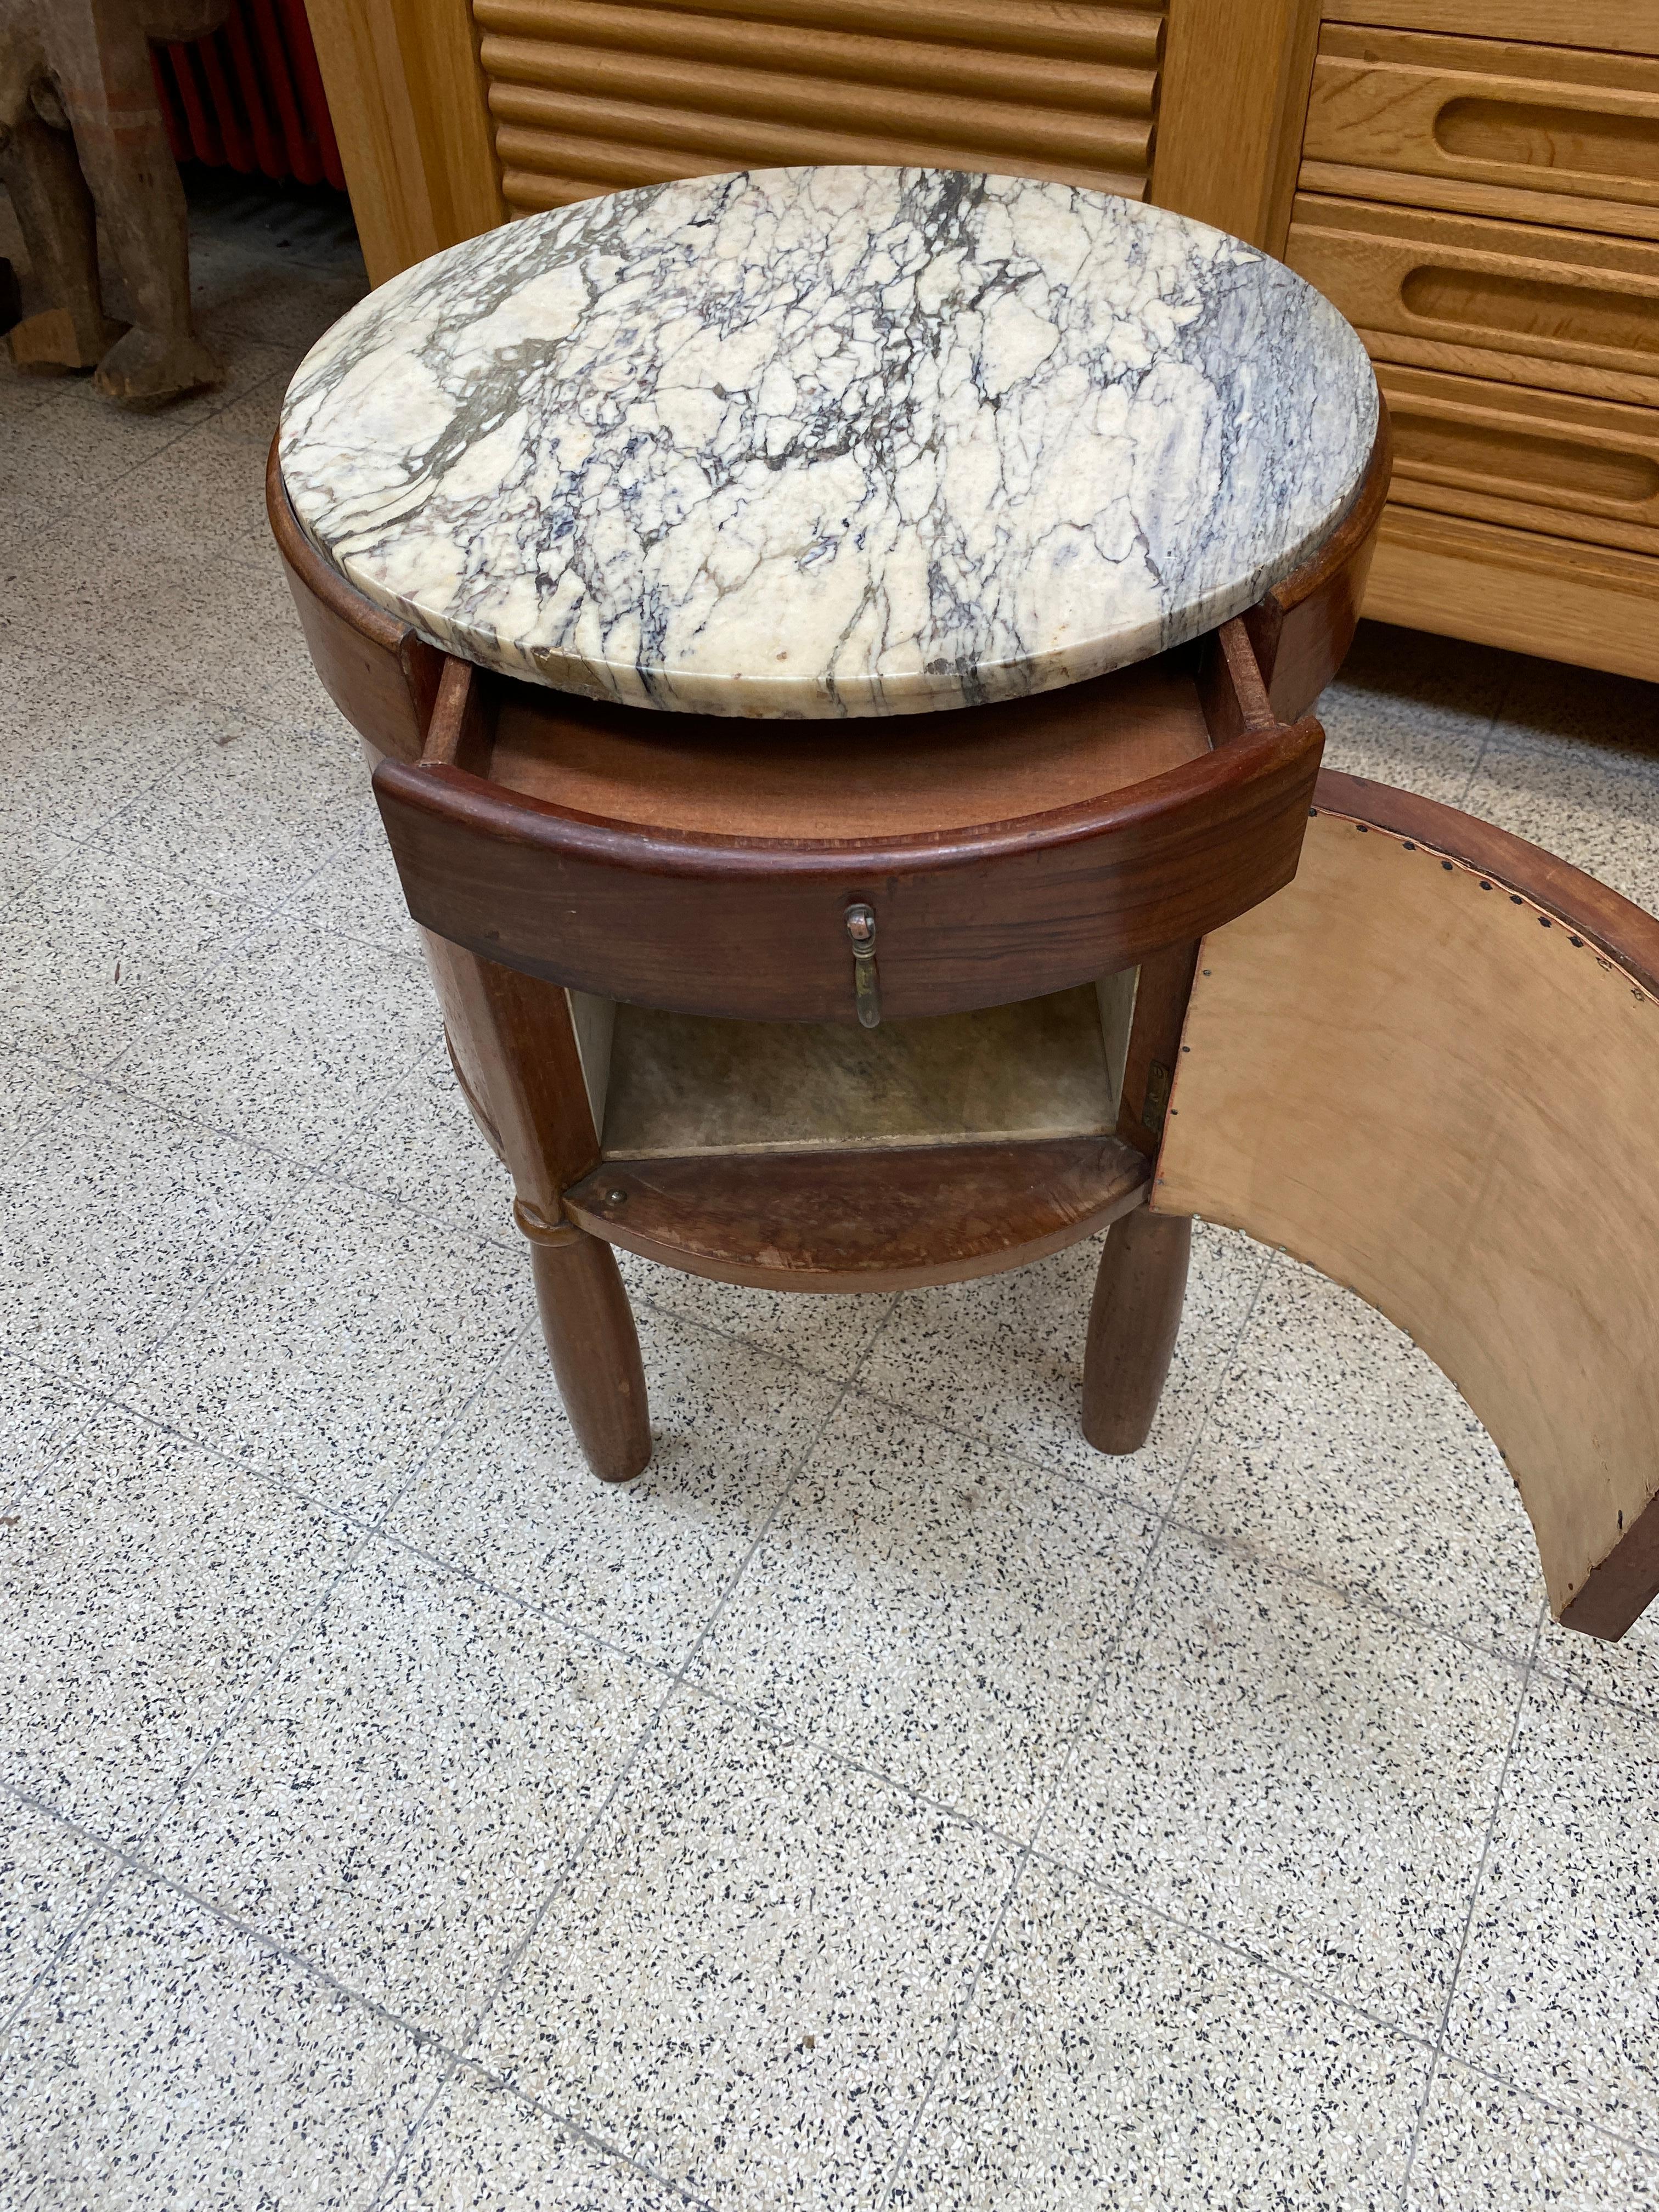 2 Art Deco Bedside Tables in Mahogany, Amboyna Burl and Marble, circa 1930 For Sale 8